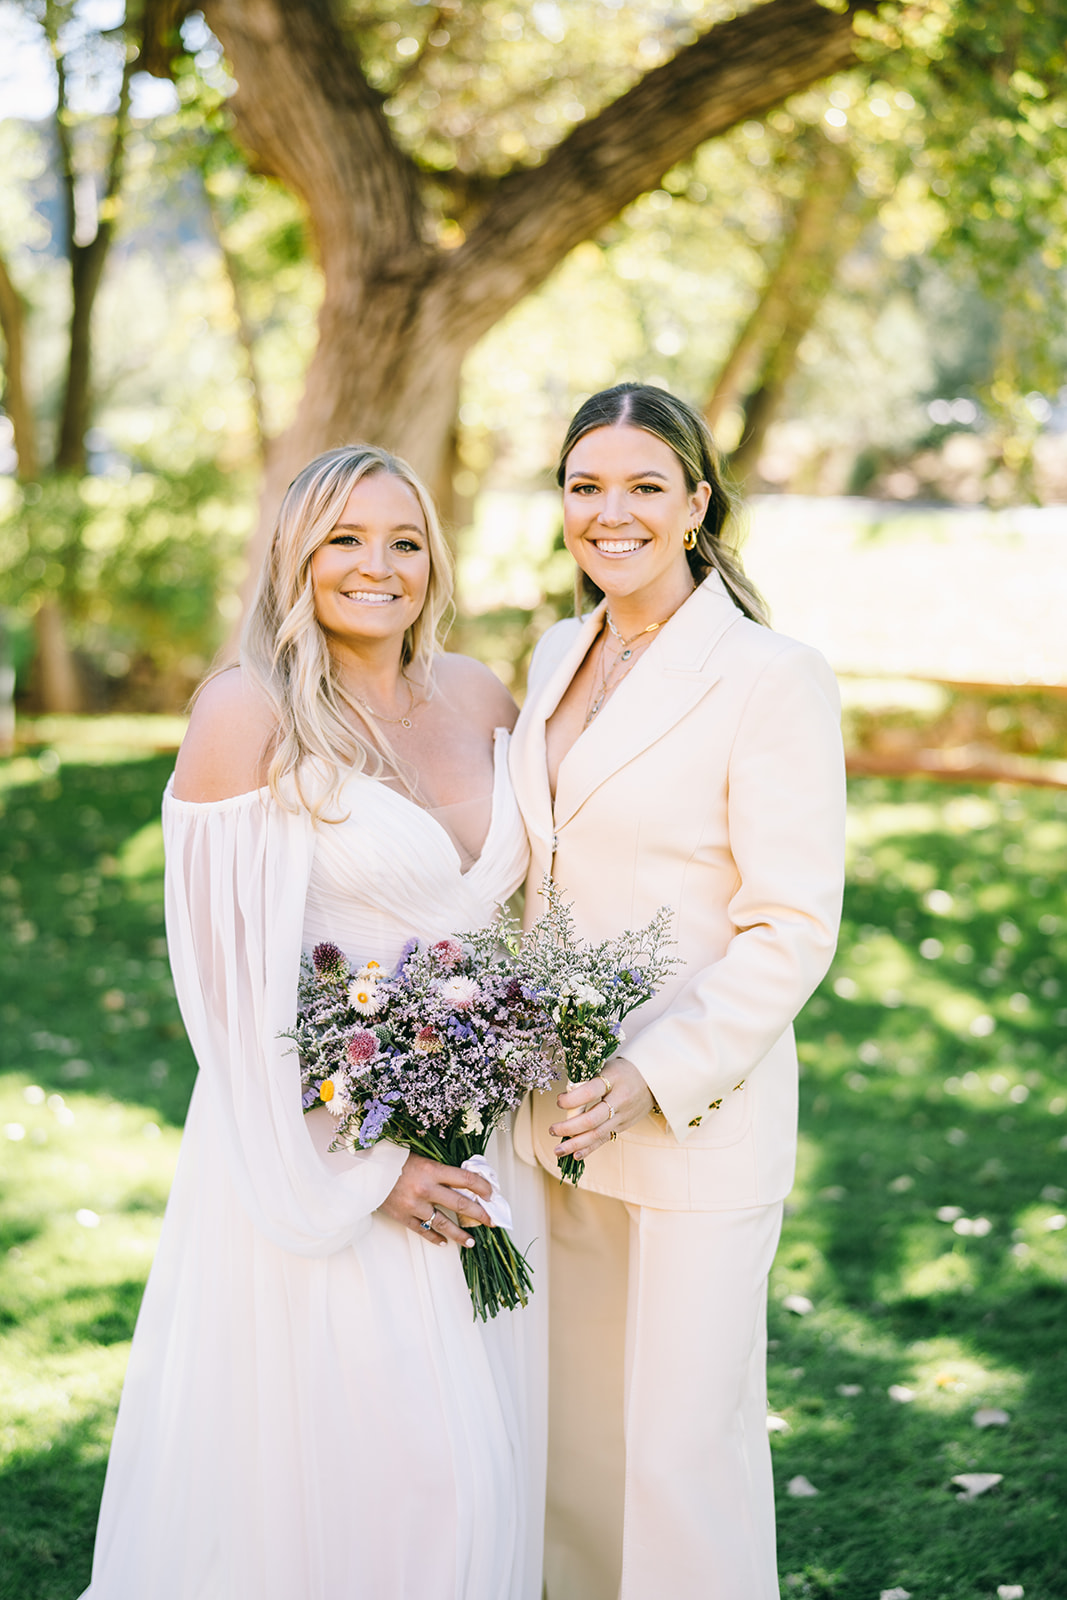 Bride standing with bouquet next to a woman in a beige outfit